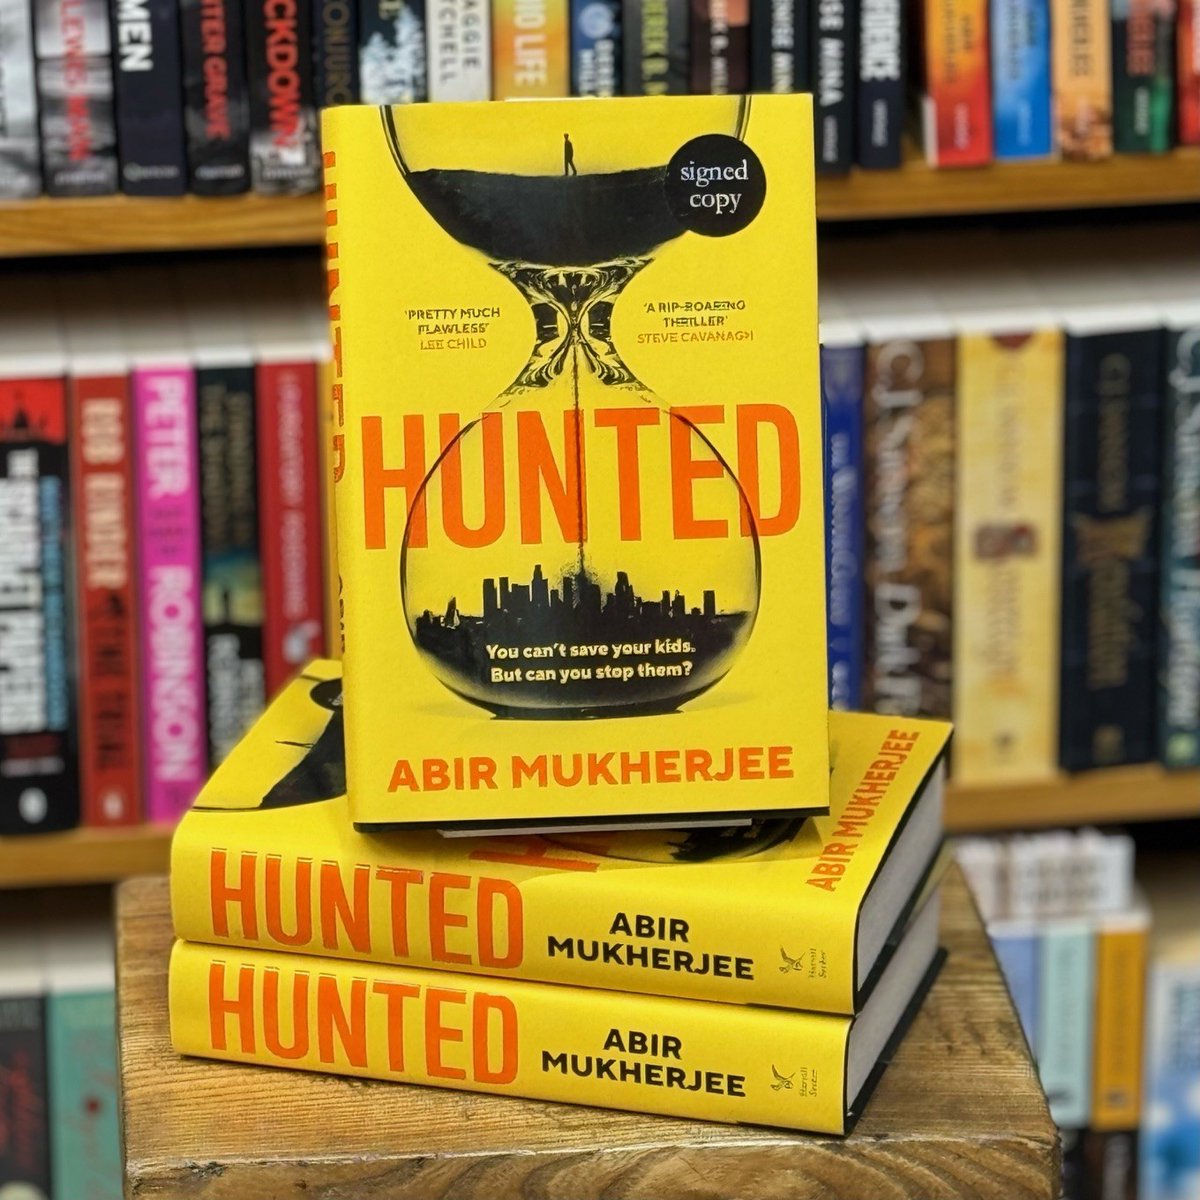 We're just adding our voices to the universal chorus of anticipation and praise for #Hunted by @radiomukhers which publishes today. Very thrilled to have some signed copies in the bookshop; so, please form an orderly queue. 🤩#thrillers #contemporarycrimefiction #mynextread